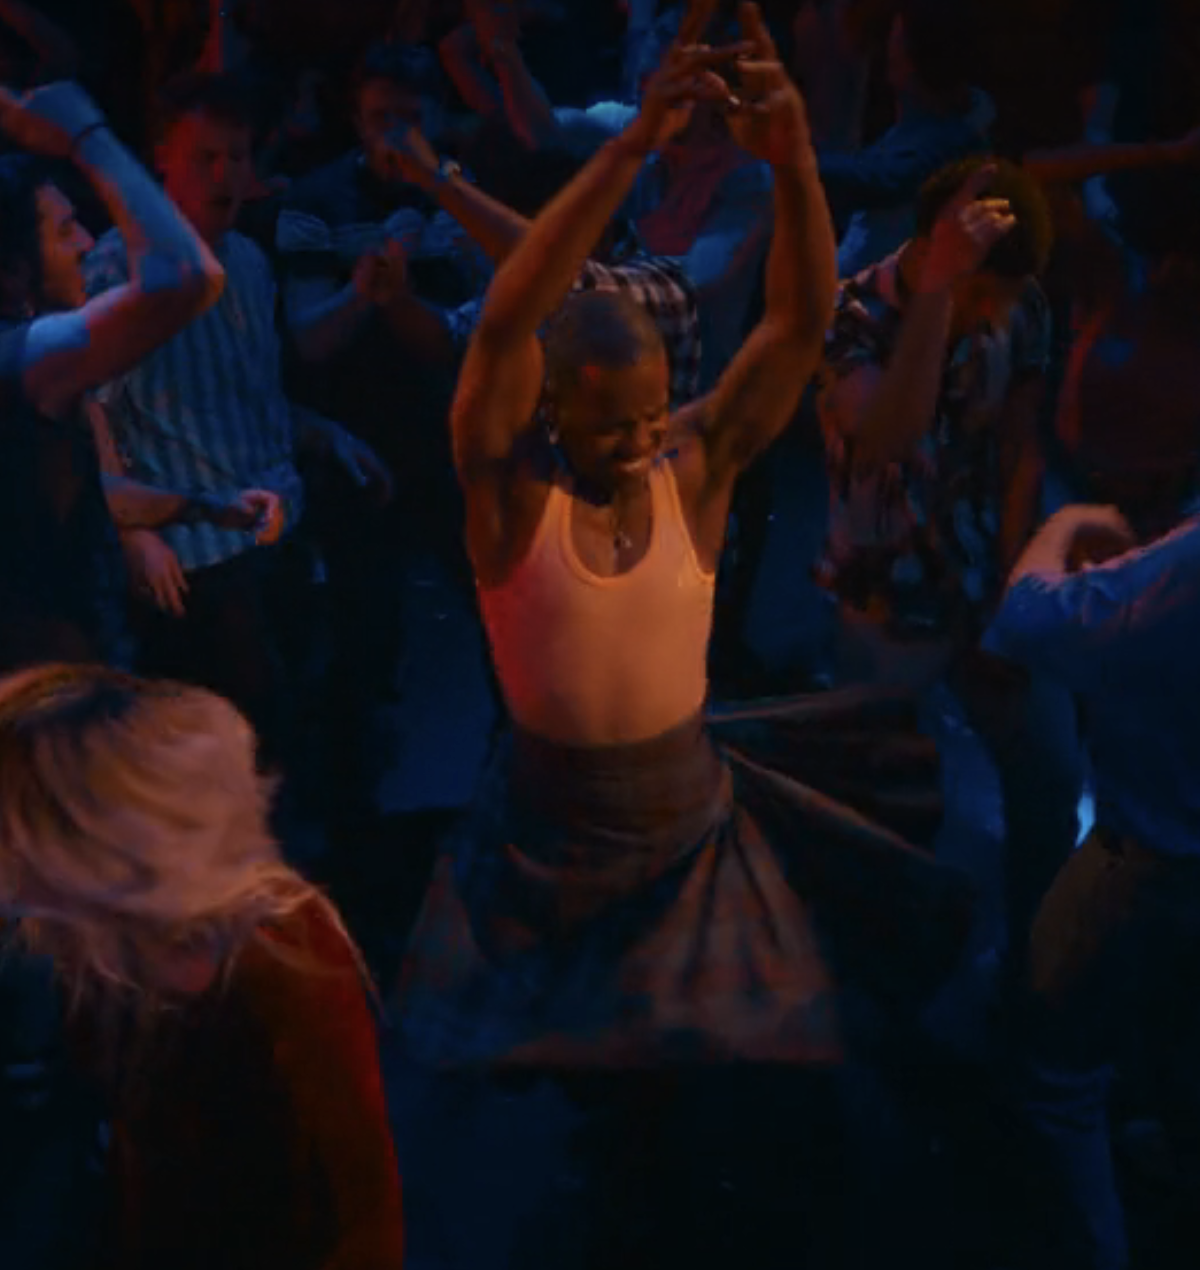 the Doctor wearing a kilt and dancing energetically in a crowded party scene